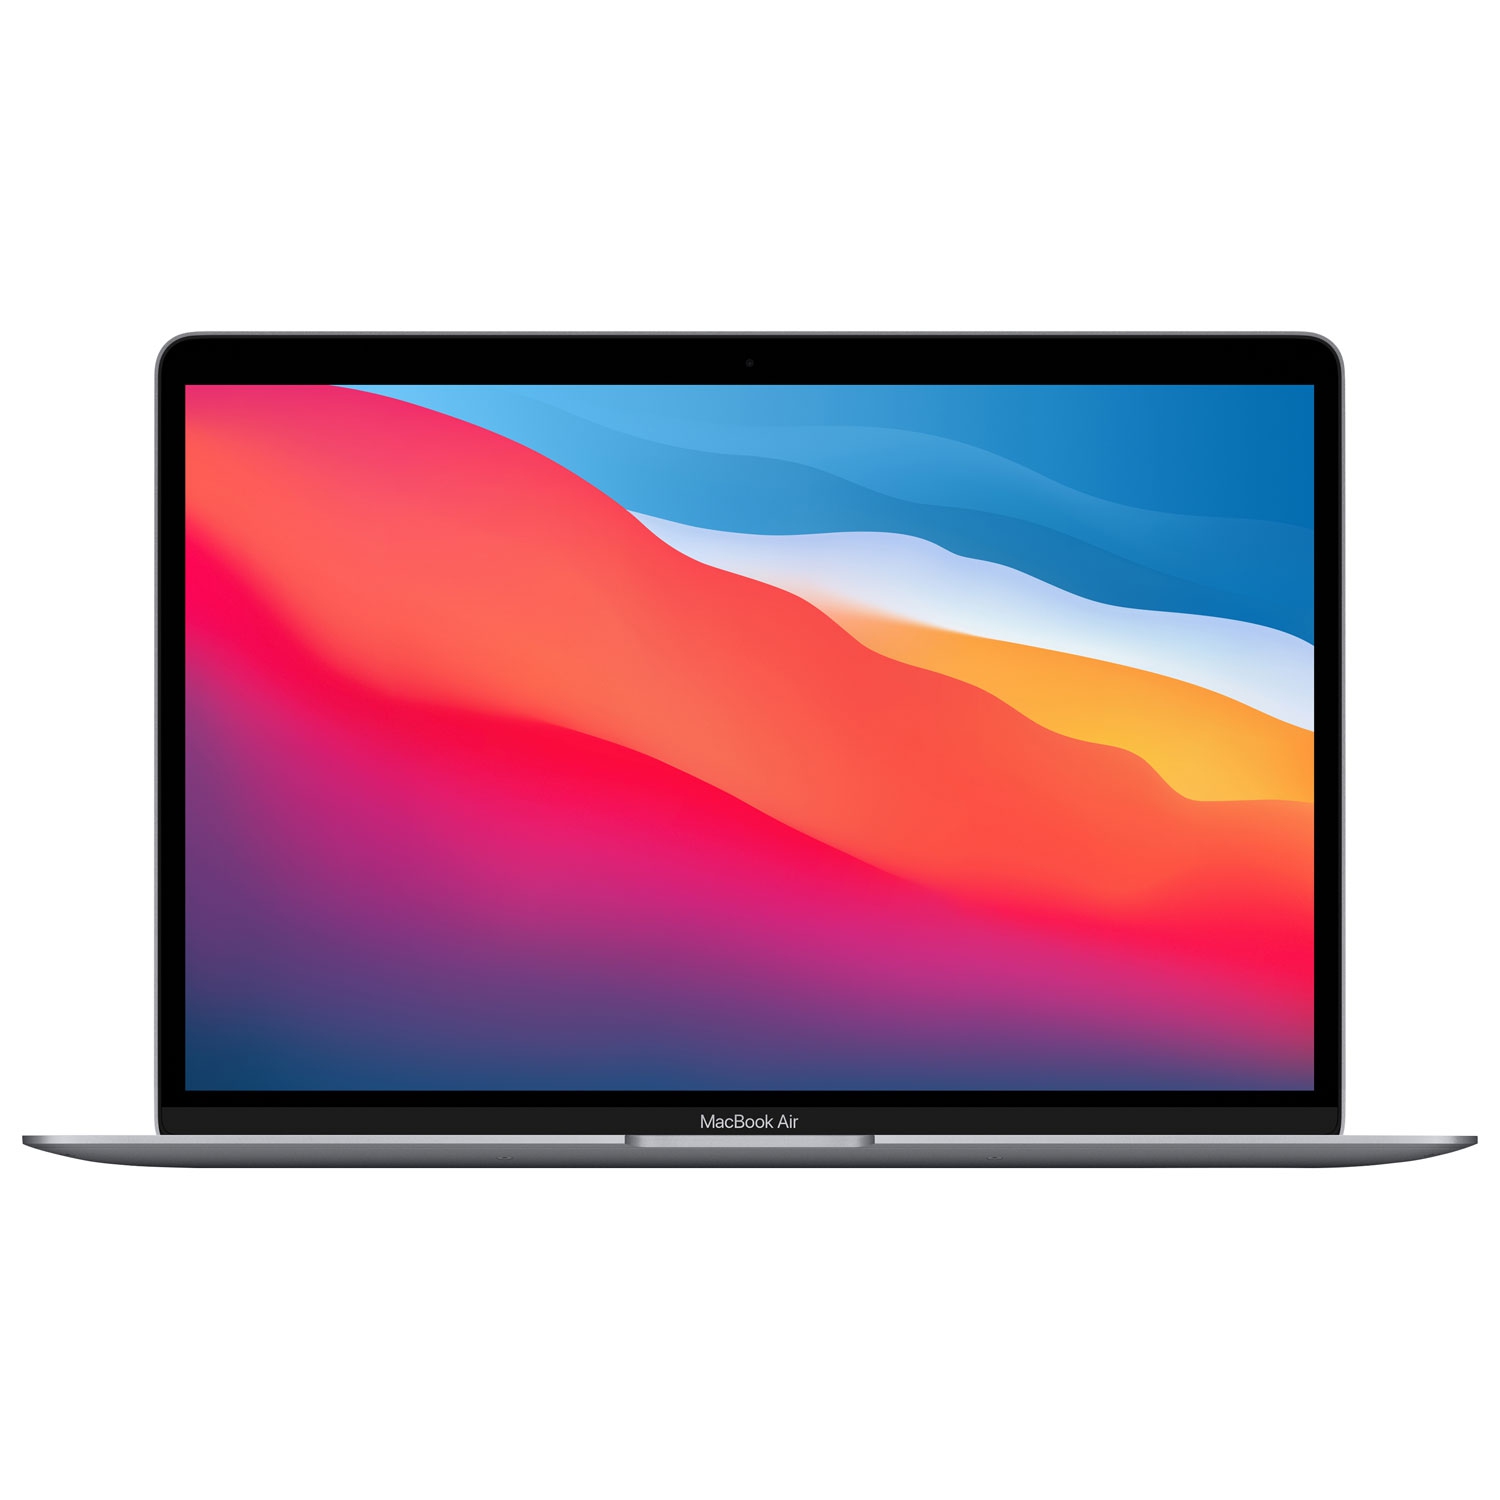 Apple MacBook Air 13.3" w/ Touch ID (Fall 2020) - Space Grey (Apple M1 Chip / 512GB SSD / 8GB RAM) - Apple Care+ Expires September 2024 - En - Open Box ( 10 / 10 Condition )